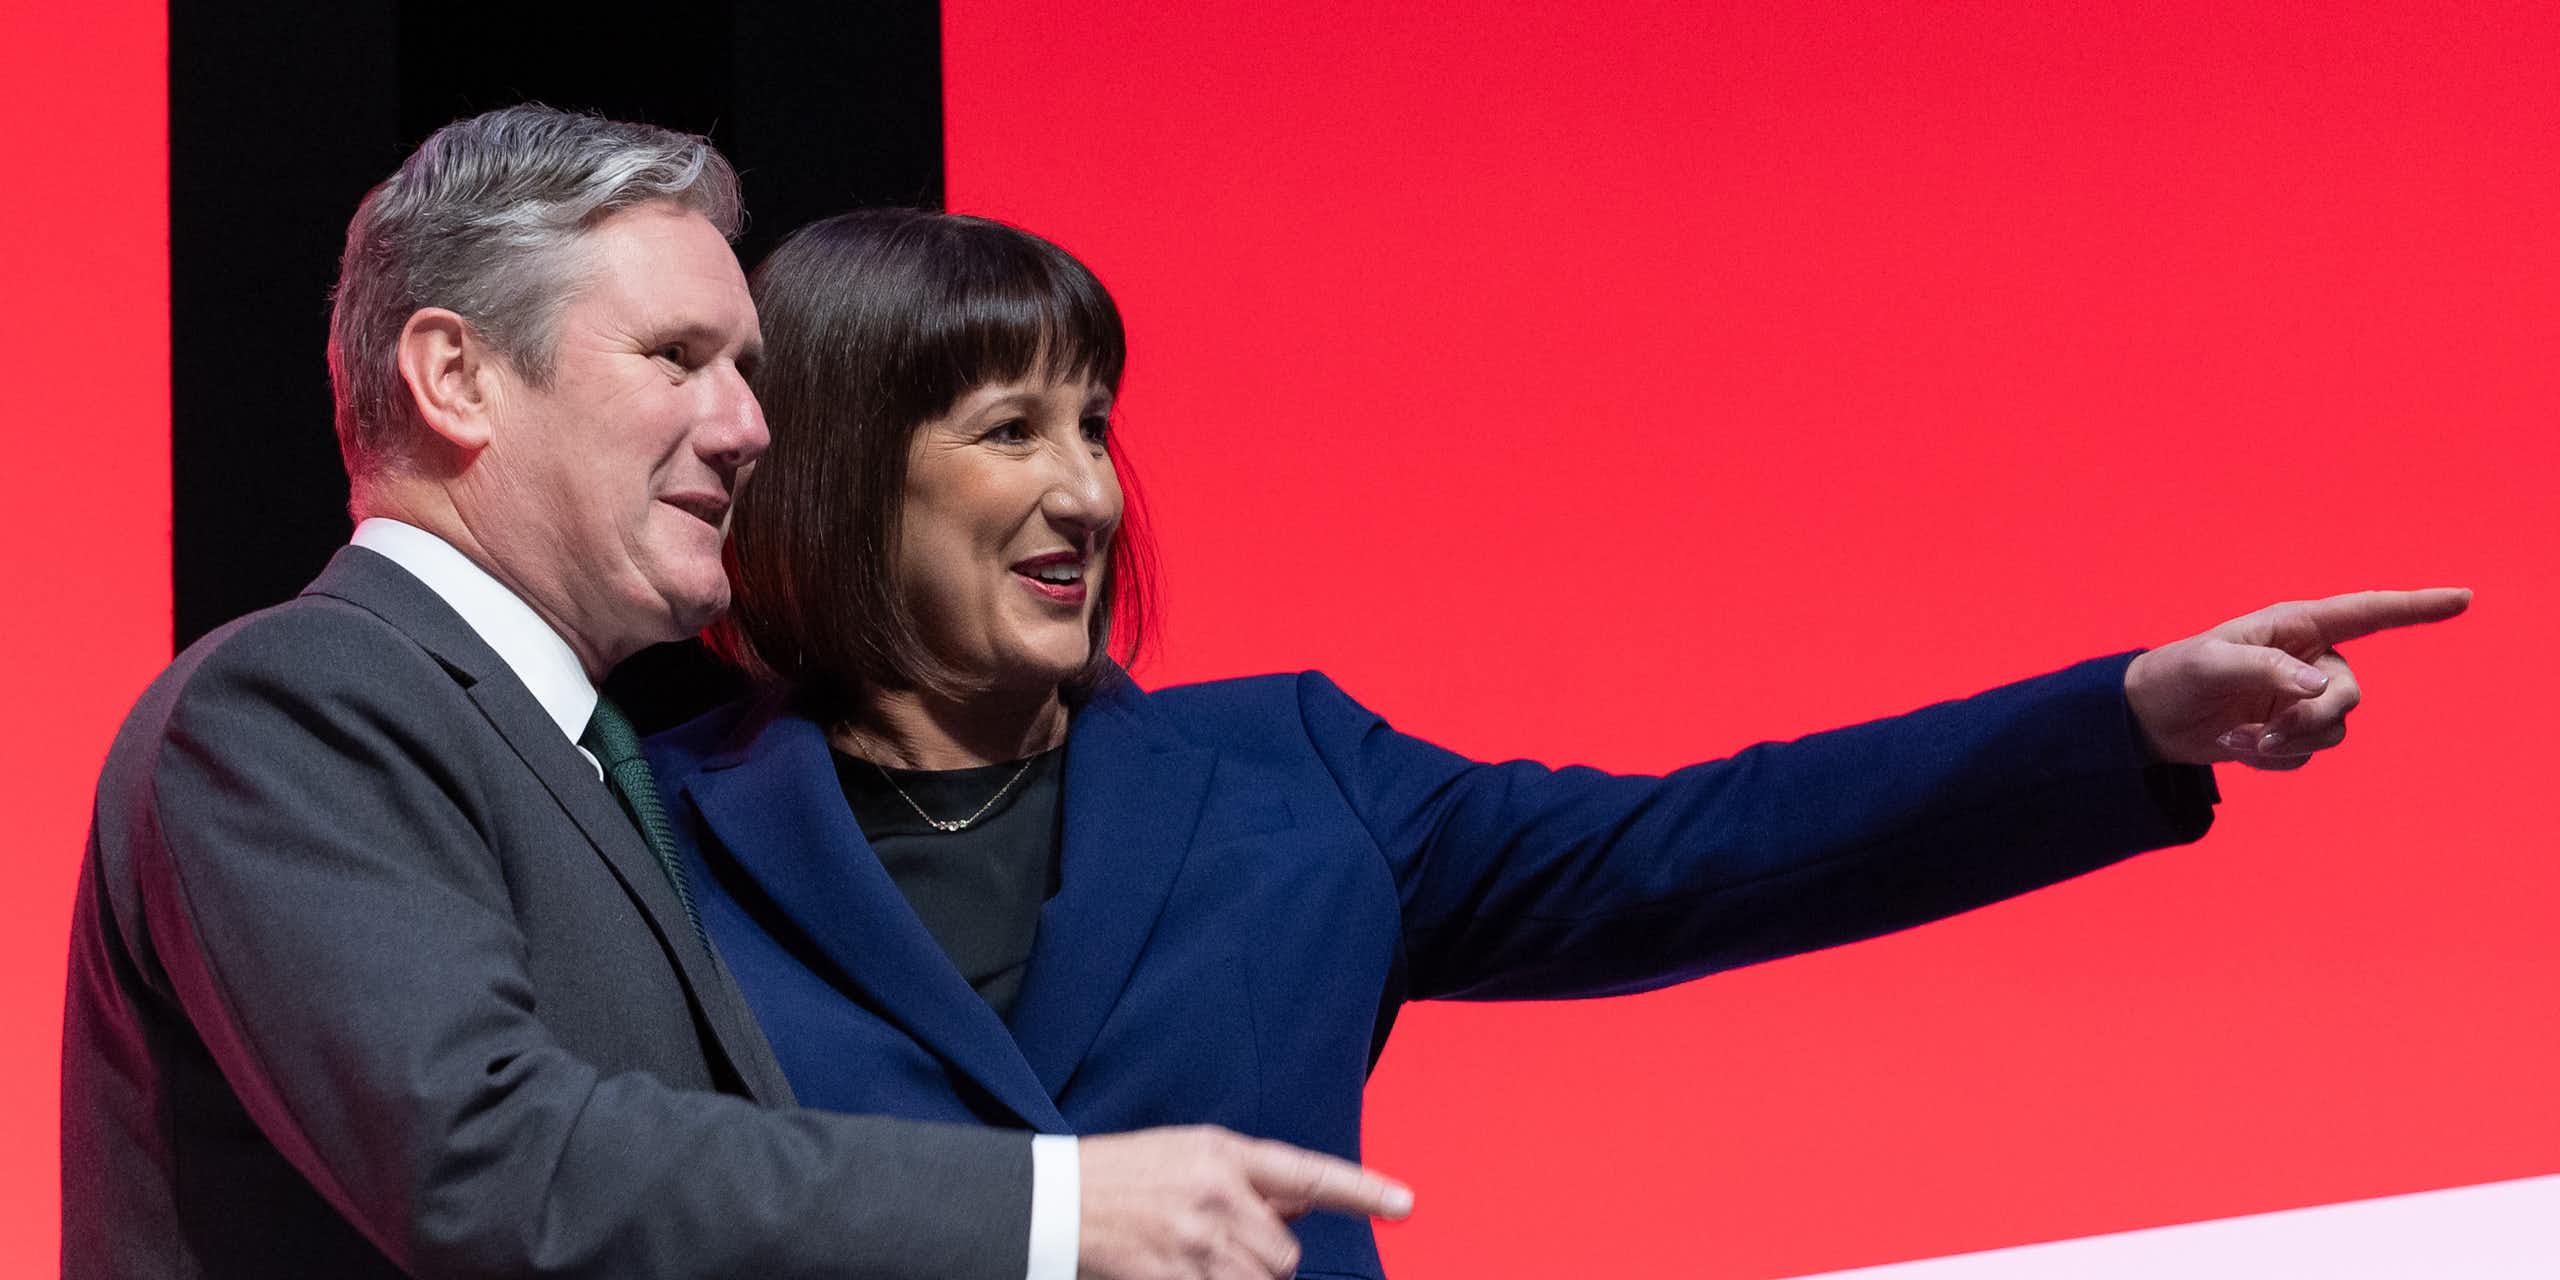 Keir Starmer and Rachel Reeves both pointing and smiling at something off camera